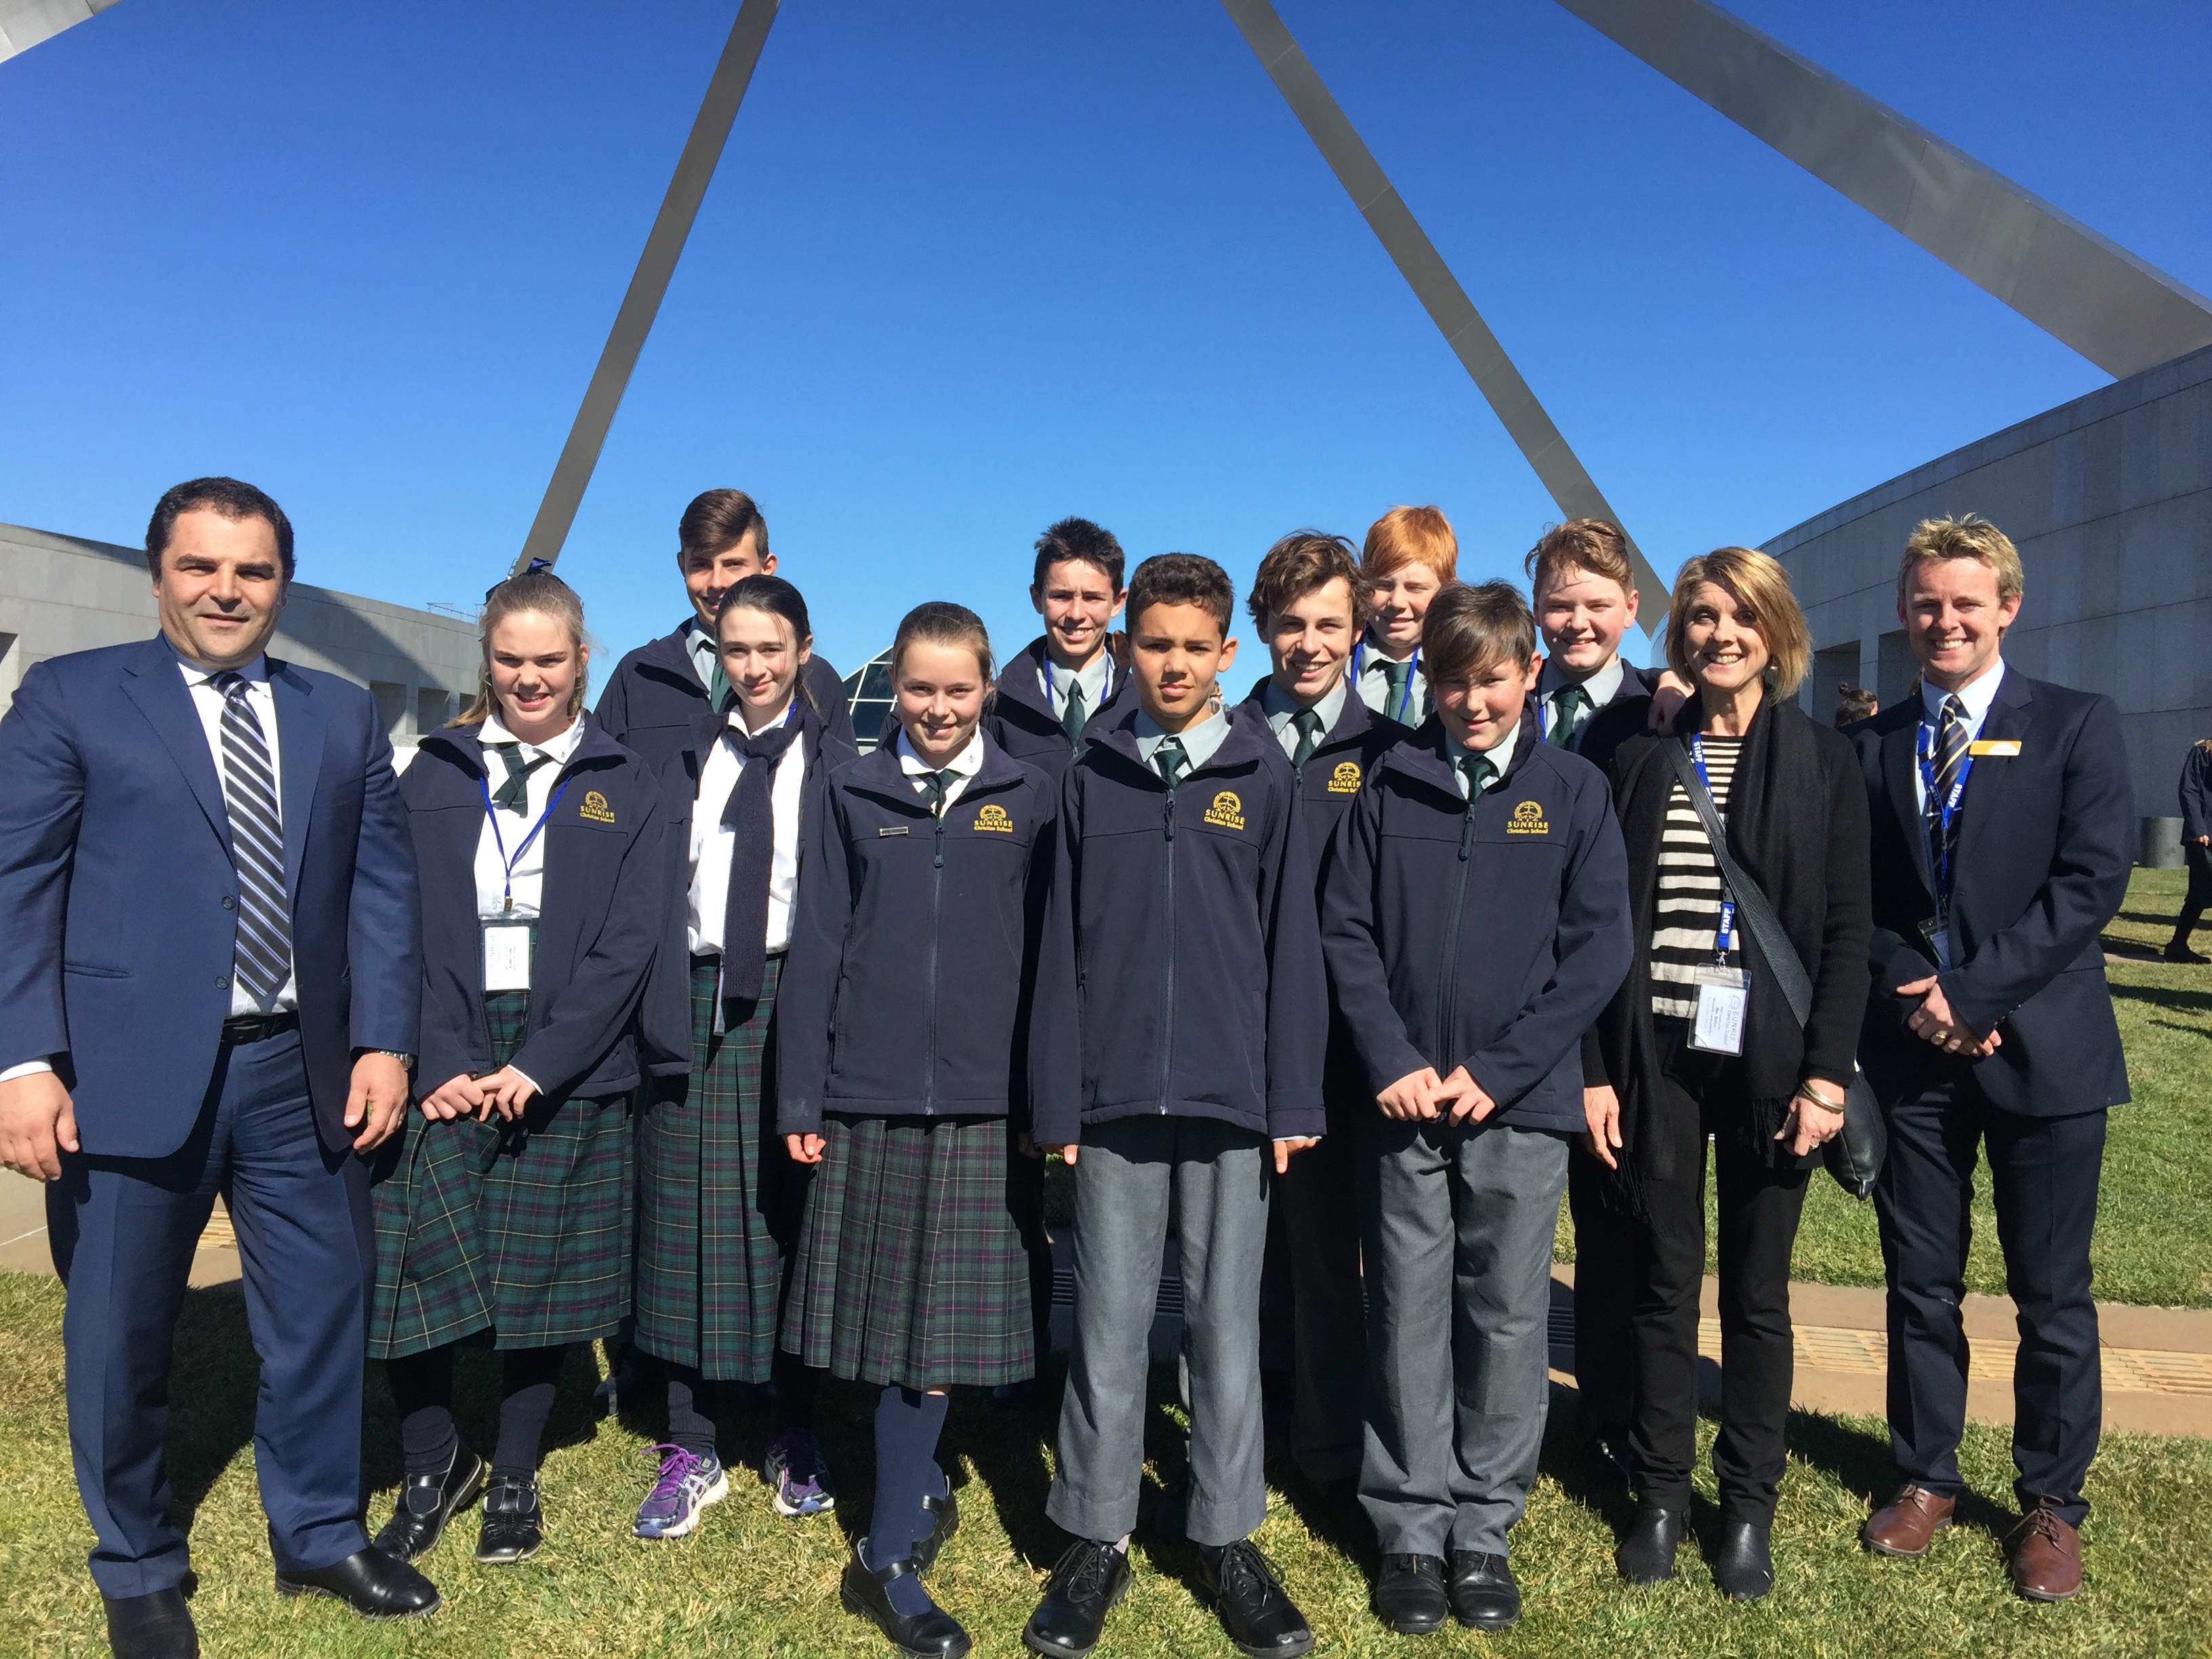 Pasin welcomes Sunrise Christian School to Canberra